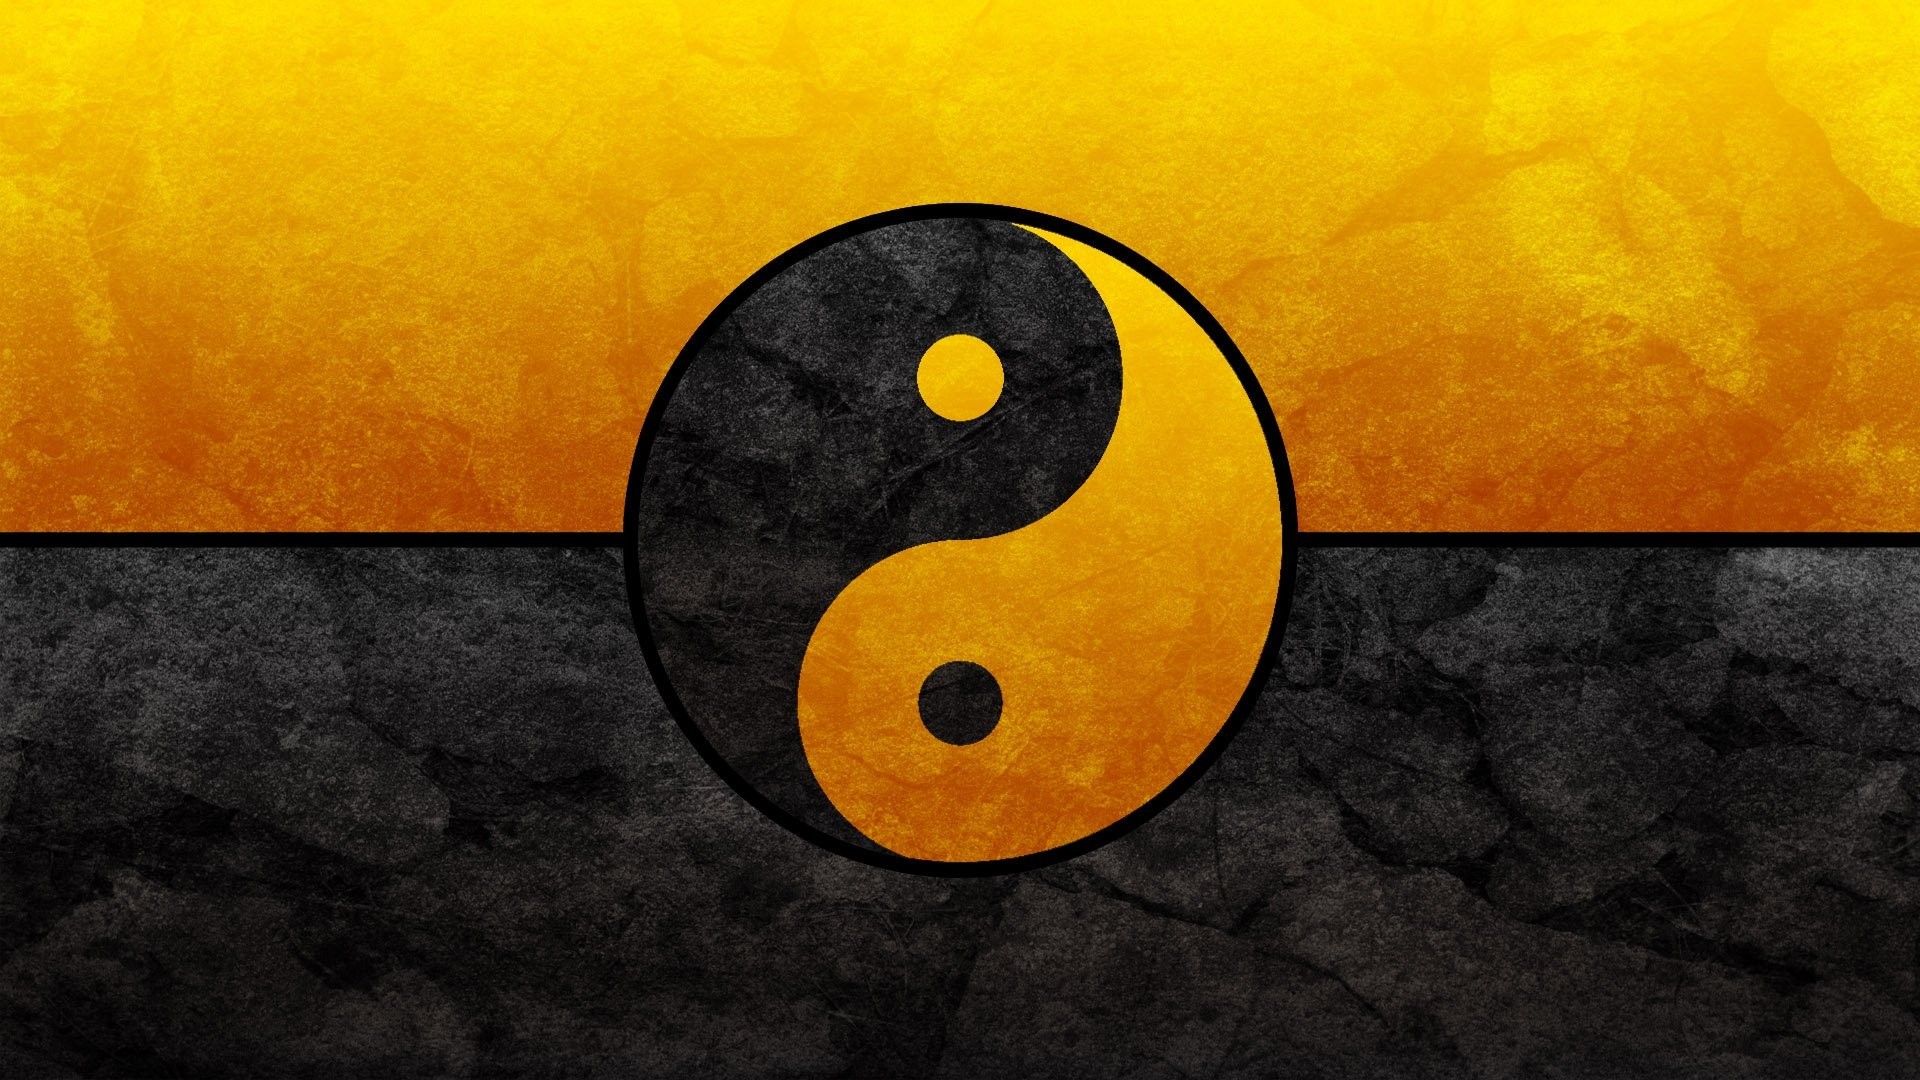 Ying Yang Wallpaper (74+ Pictures)